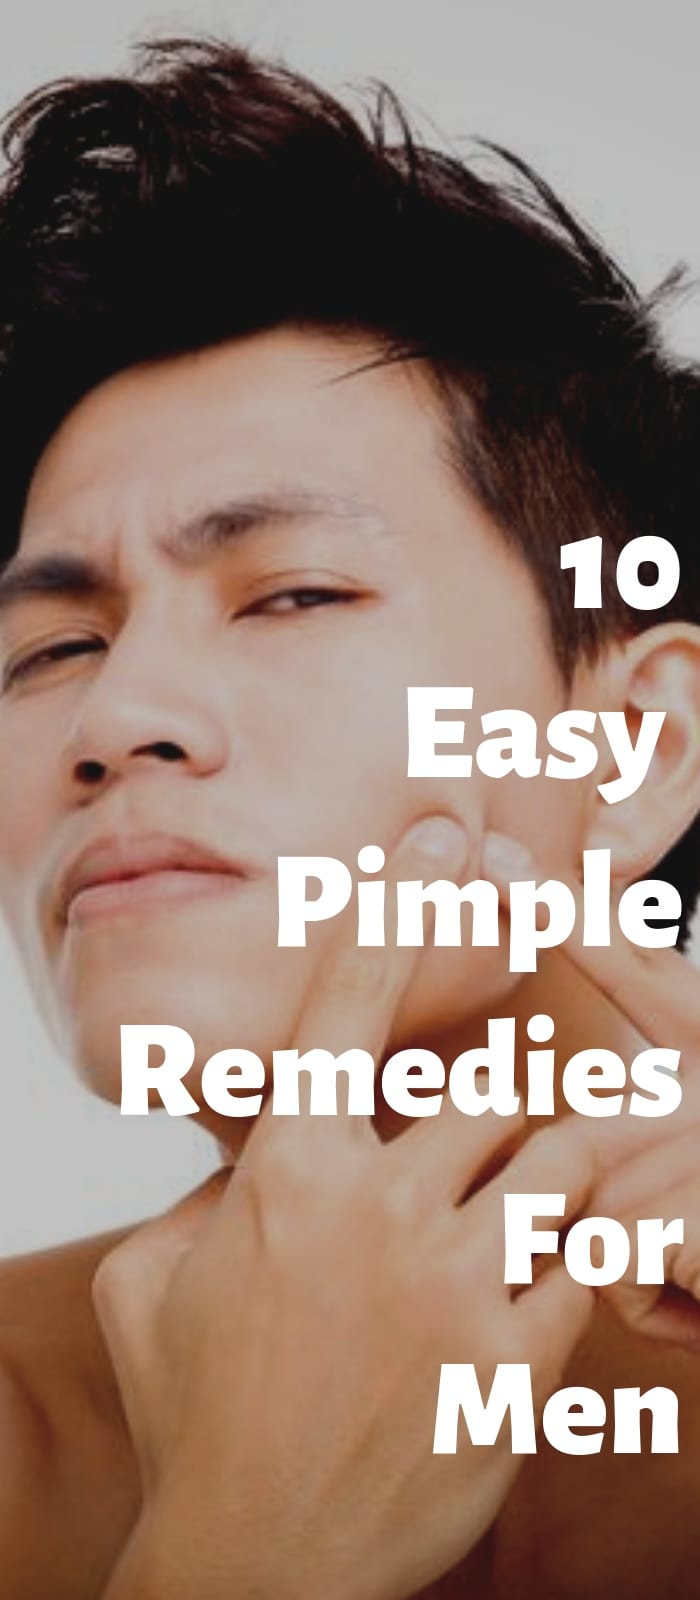 10 Easy Pimple Remedies For Men (1)